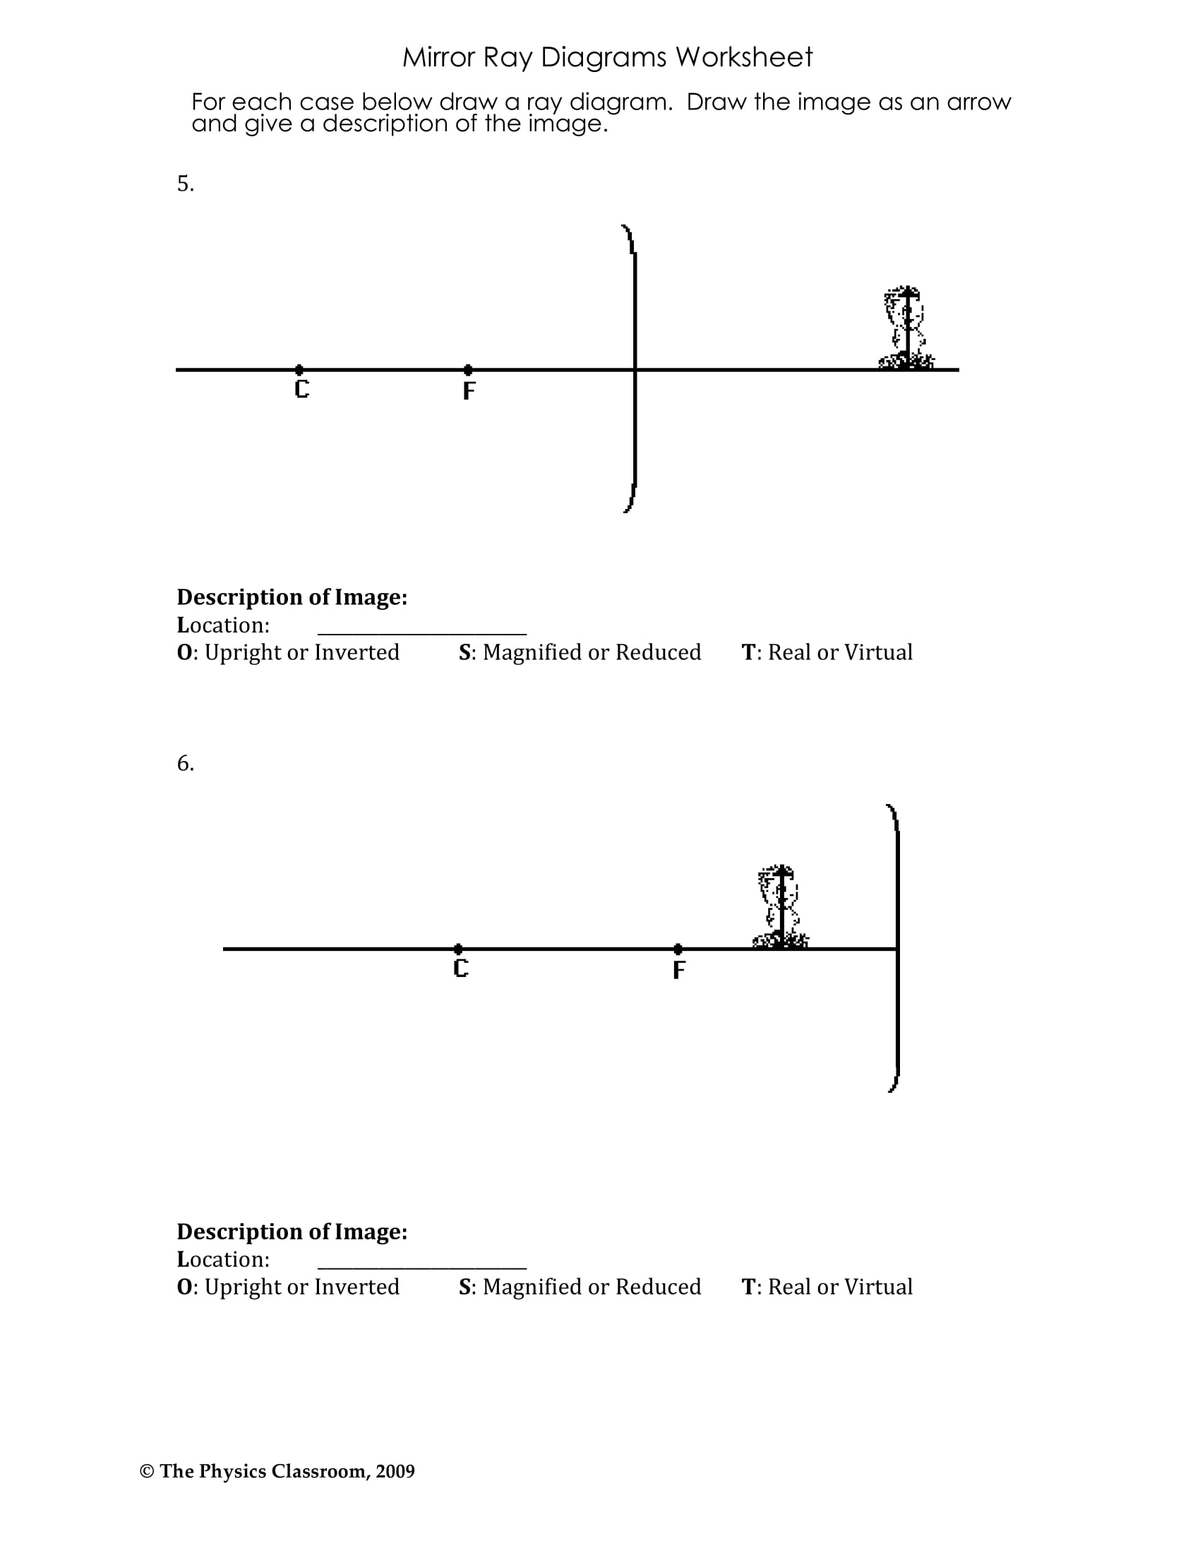 Mirror Ray Diagrams Worksheet
For each case below draw a ray diagram. Draw the image as an arrow
and give a description of the image.
5.
F
Description of Image:
Location:
0: Upright or Inverted
S: Magnified or Reduced
T: Real or Virtual
6.
C
Description of Image:
Location:
0: Upright or Inverted
S: Magnified or Reduced
T: Real or Virtual
© The Physics Classroom, 2009
